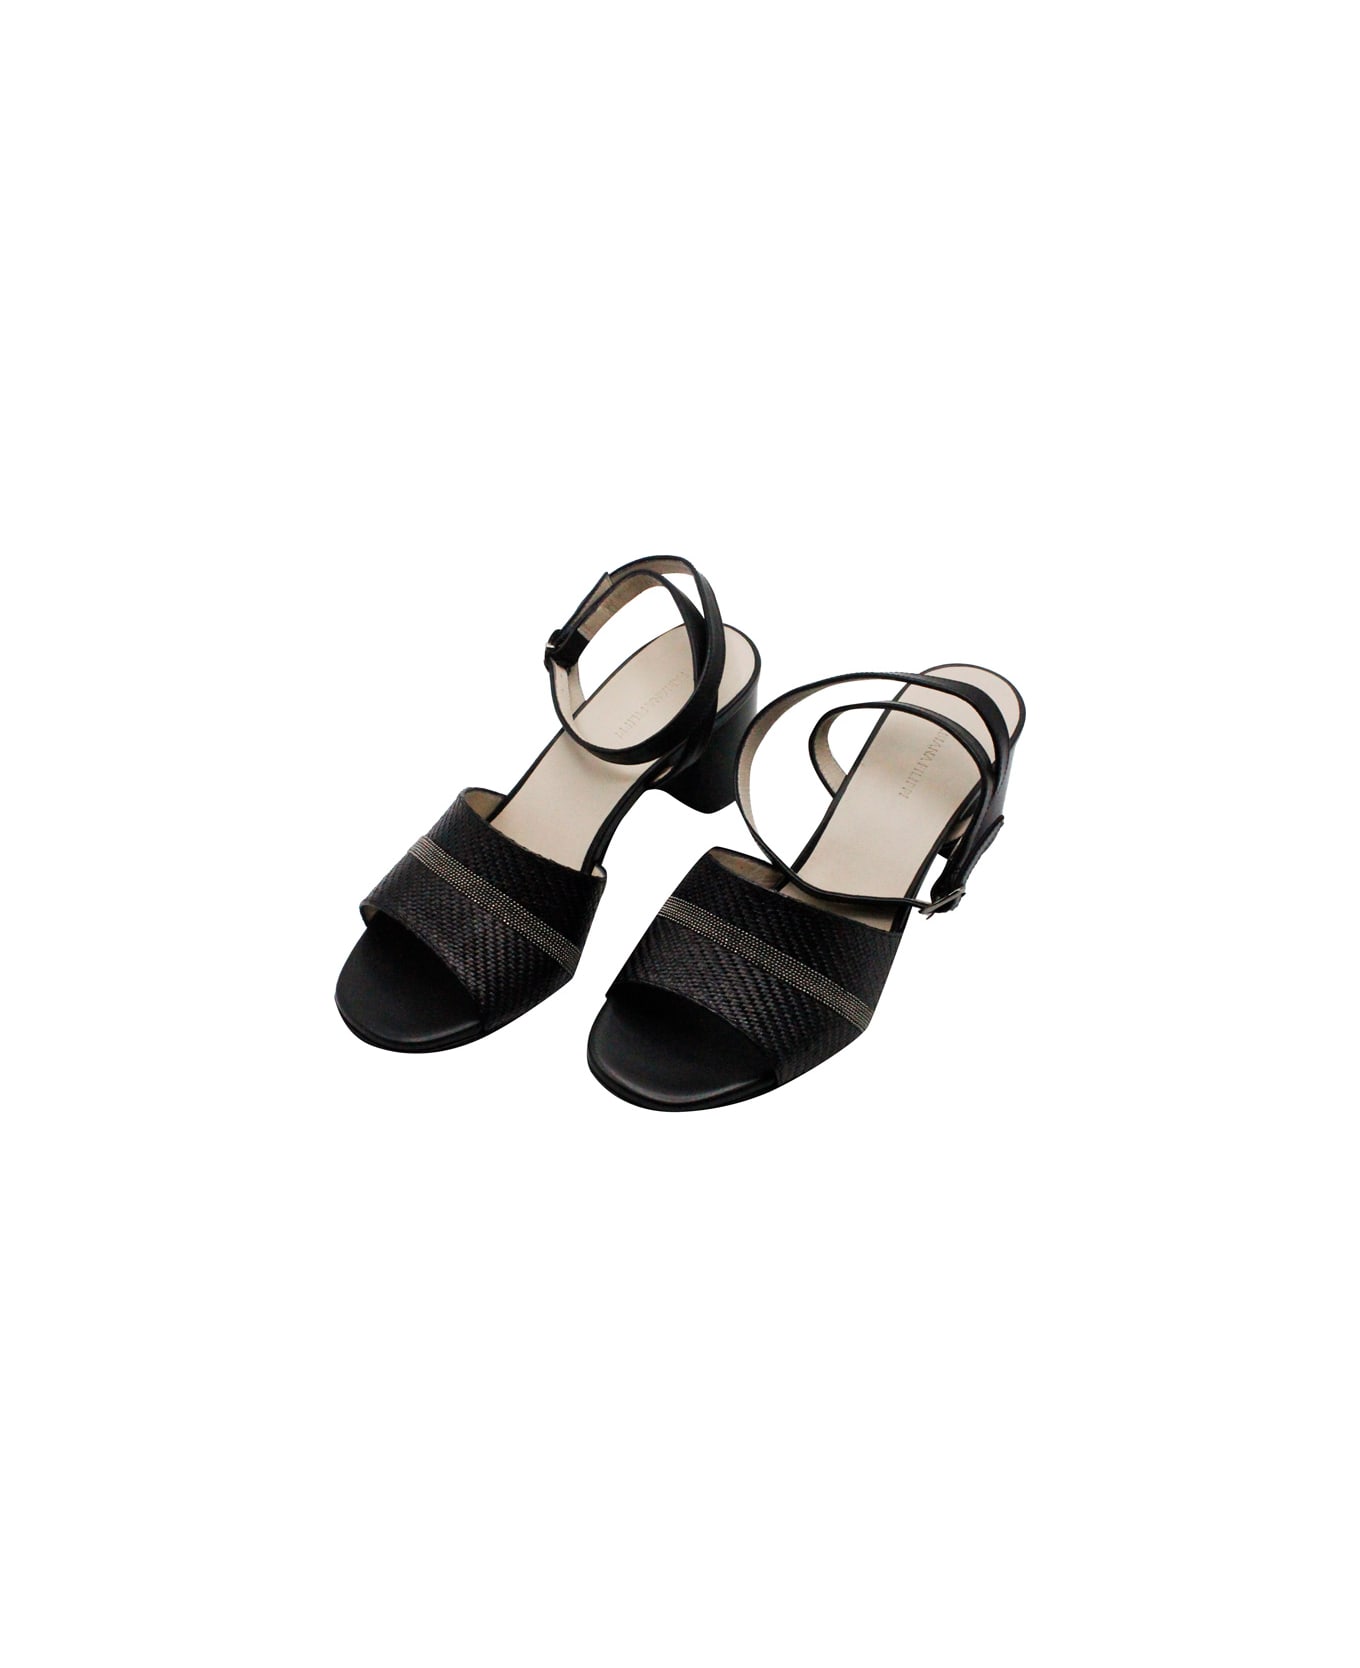 Fabiana Filippi Sandal Shoe Made Of Soft Leather With Adjustable Ankle Closure Embellished With Brilliant Jewels On The Front. Heel Height 6 - Black サンダル